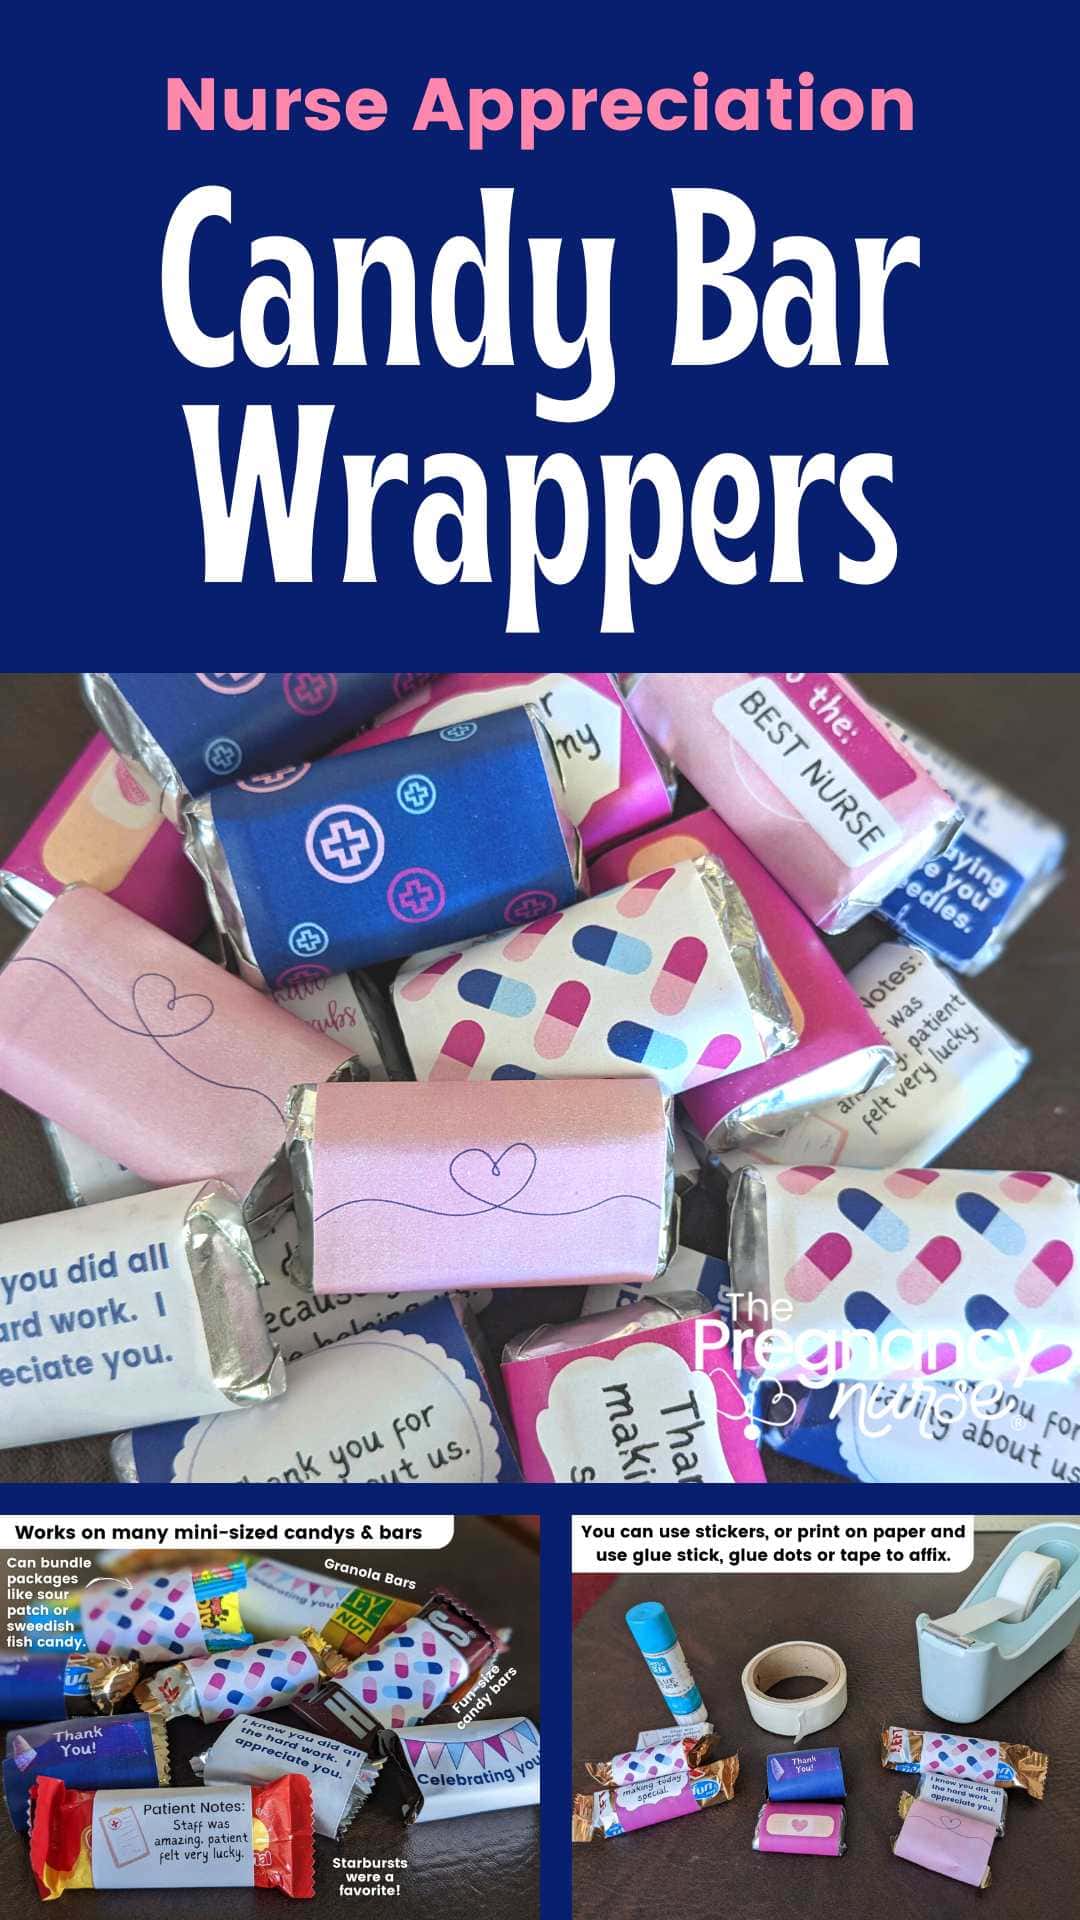 Mini candy bars are a favorite to thank your nurses with. This page will show you how to put them on the bars, and also where to get supplies if necessary. via @pullingcurls